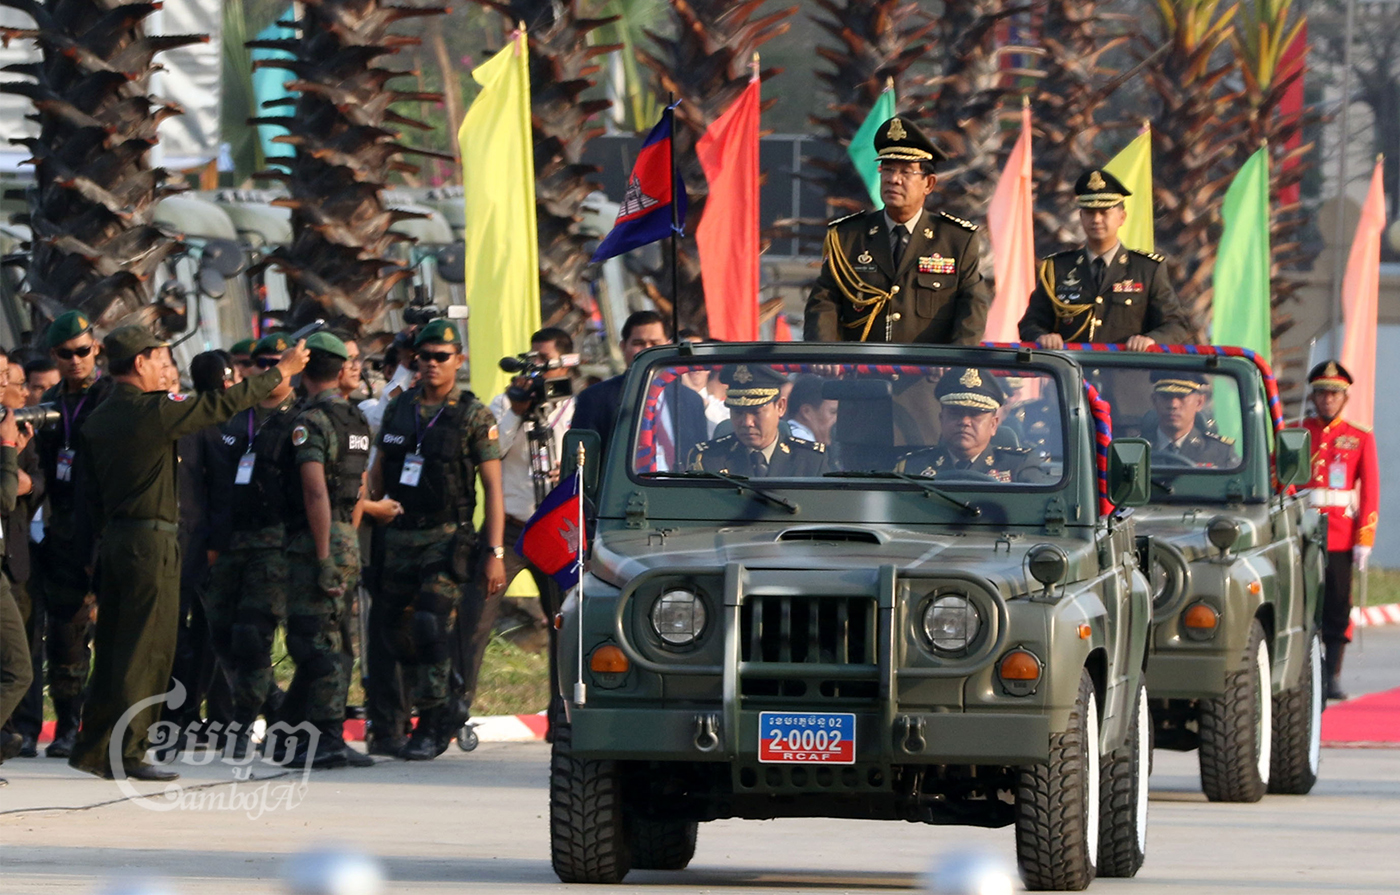 Prime Minister Hun Sen and his son Hun Manet attend a celebration for the the 20th anniversary of the establishment of the Armed Forces on January 24, 2019. CamboJA/ Panha Chhorpoan